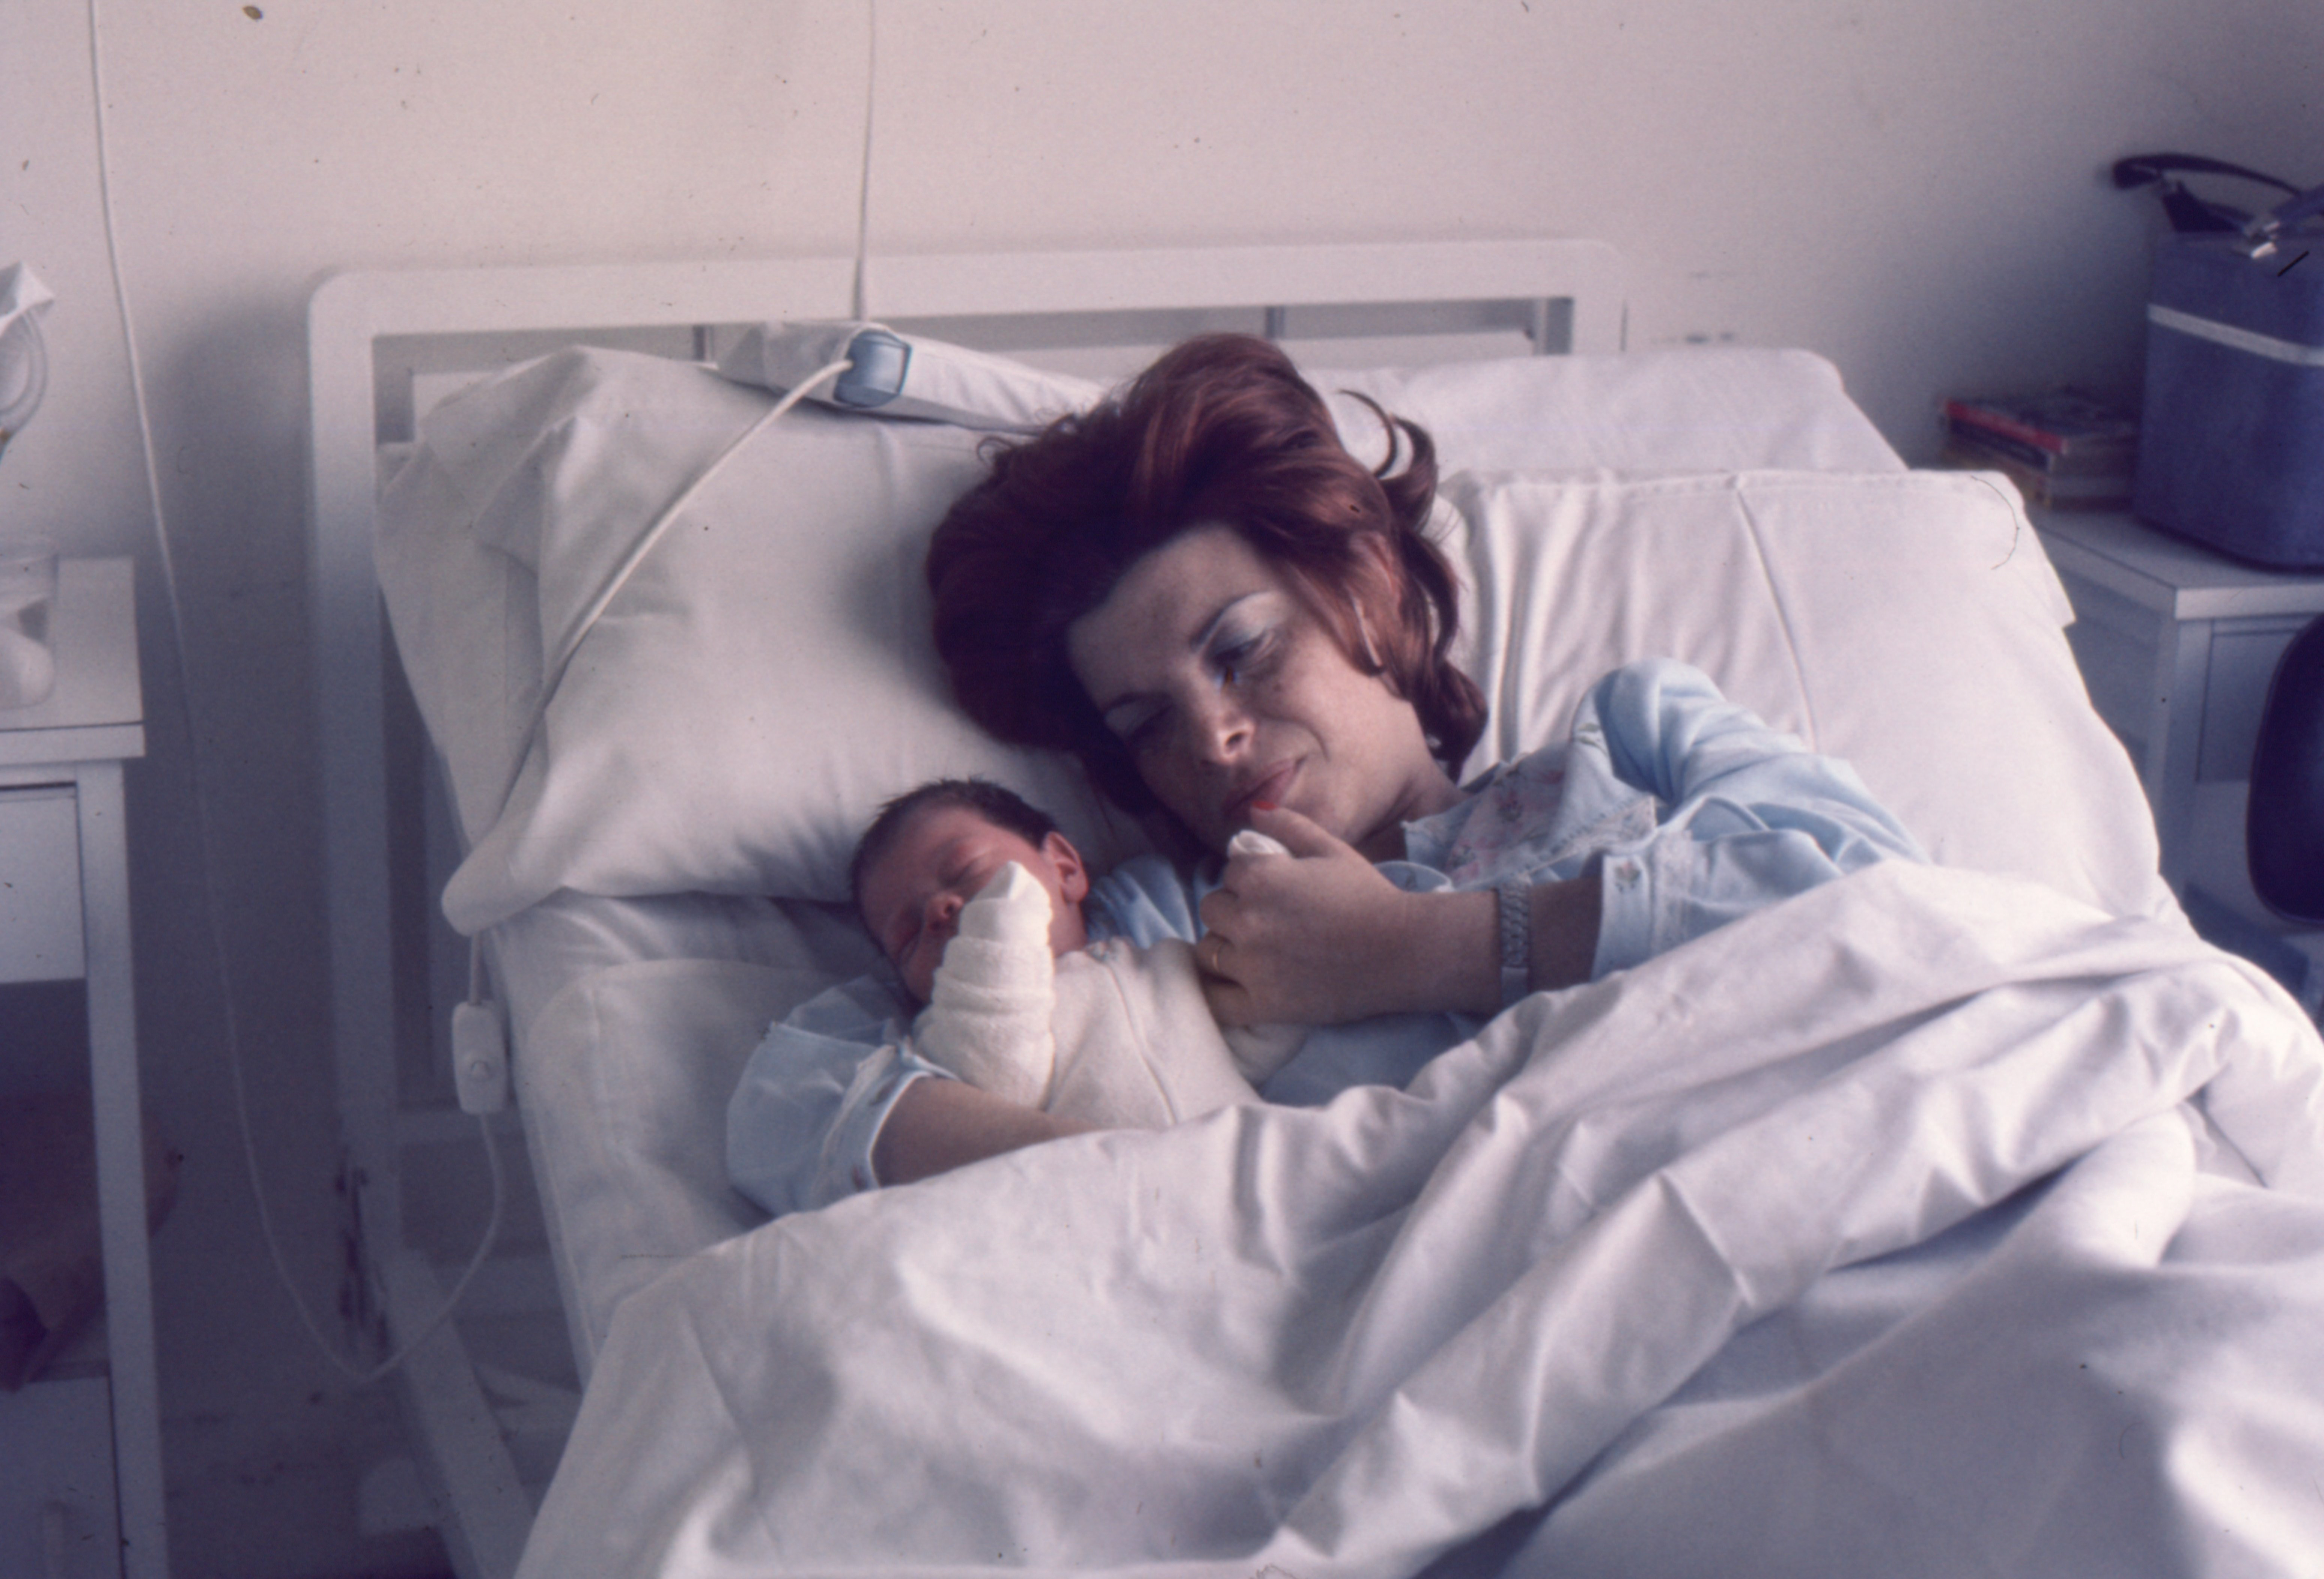 A woman with a newborn baby | Source: GettyImages